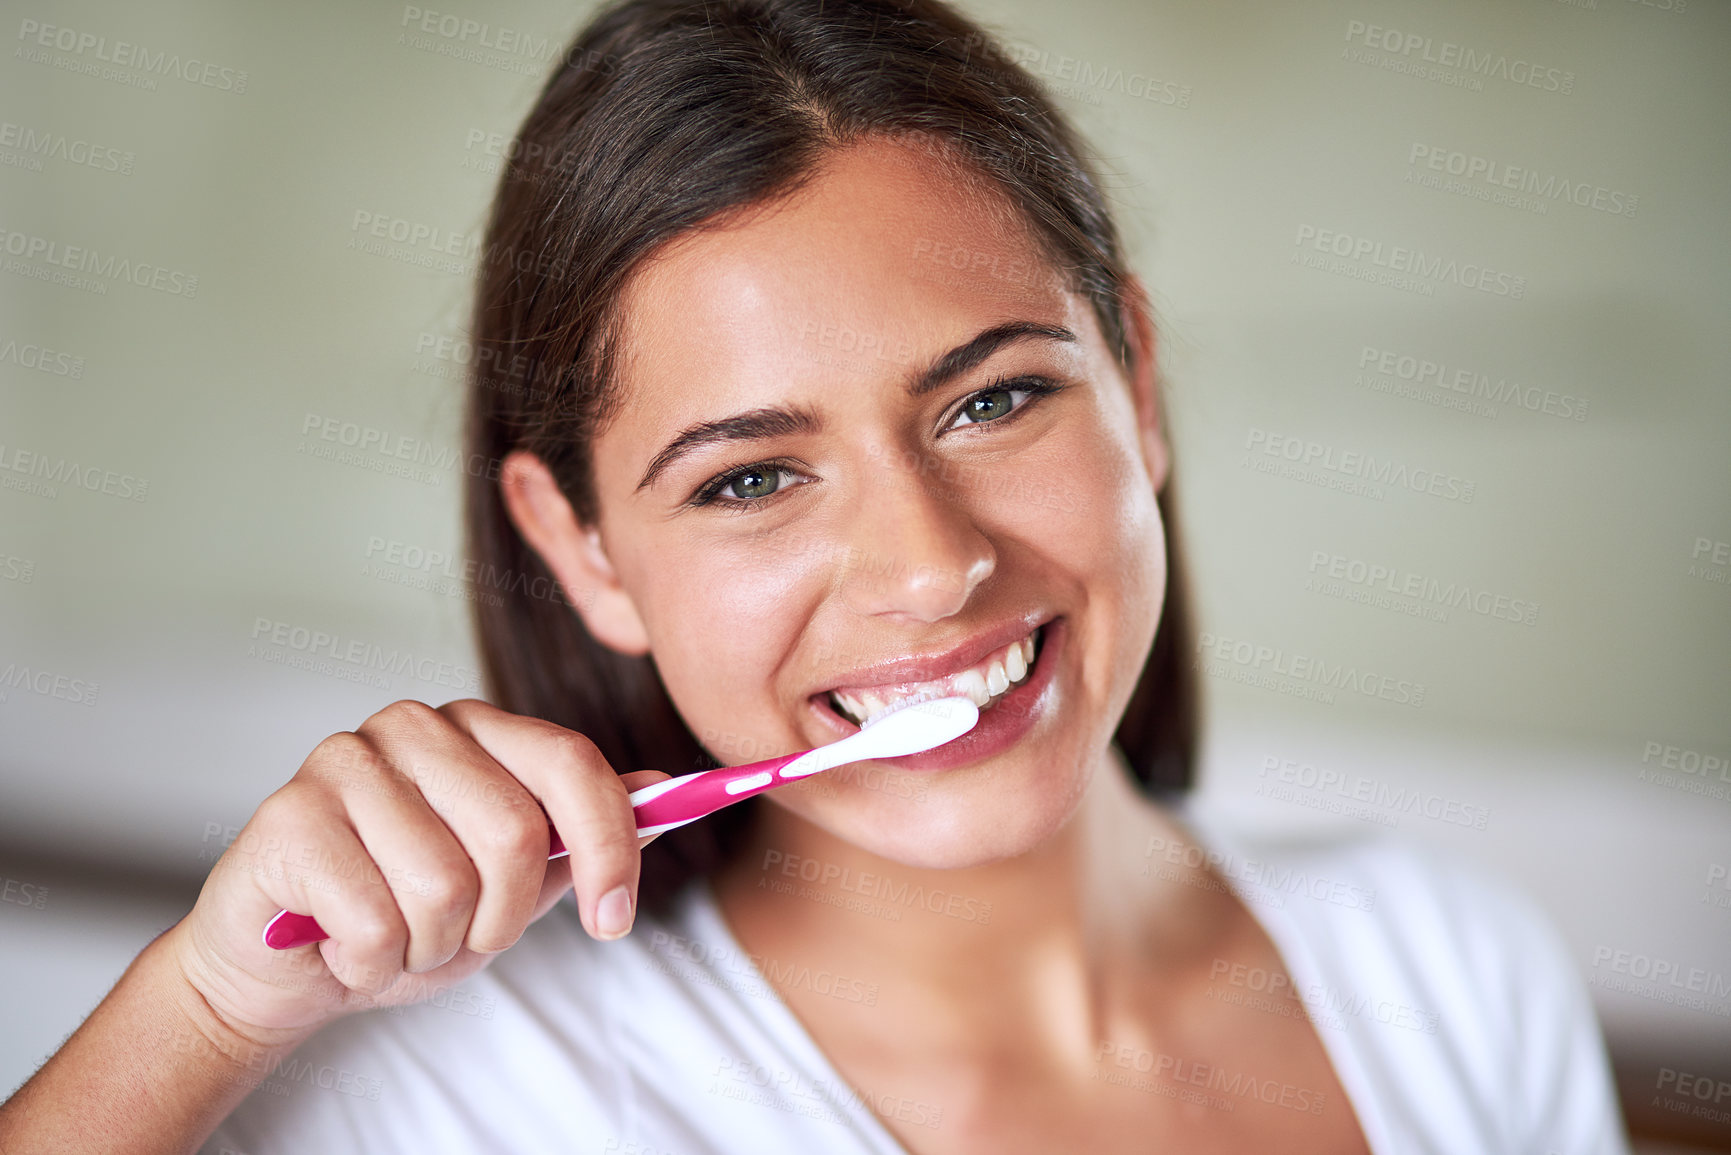 Buy stock photo Portrait of a beautiful woman brushing her teeth in the bathroom at home